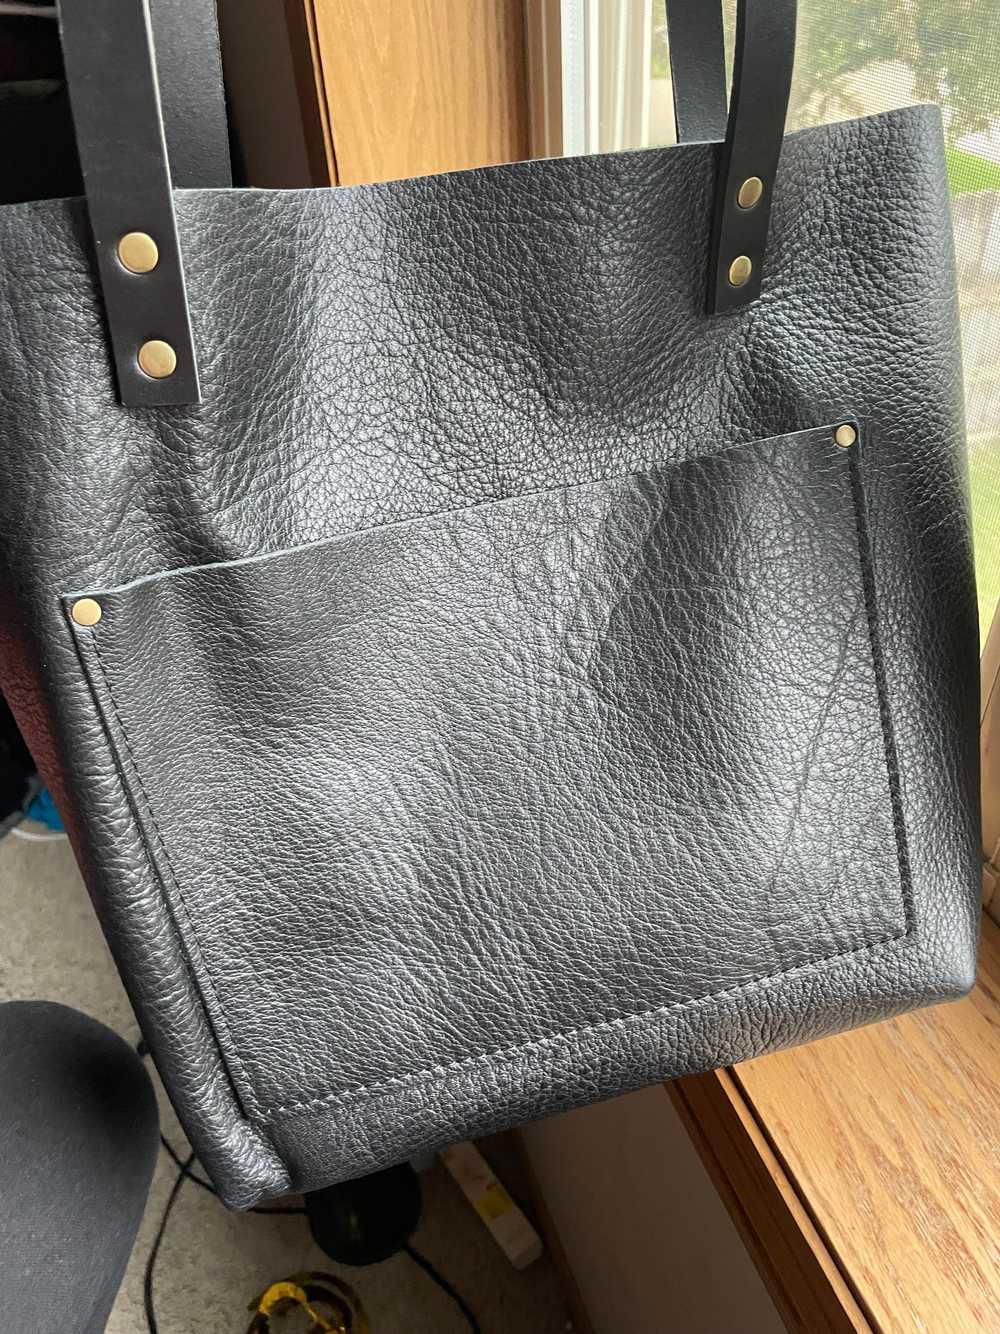 Portland Leather 'Almost Perfect' Leather Tote Bag - image 5